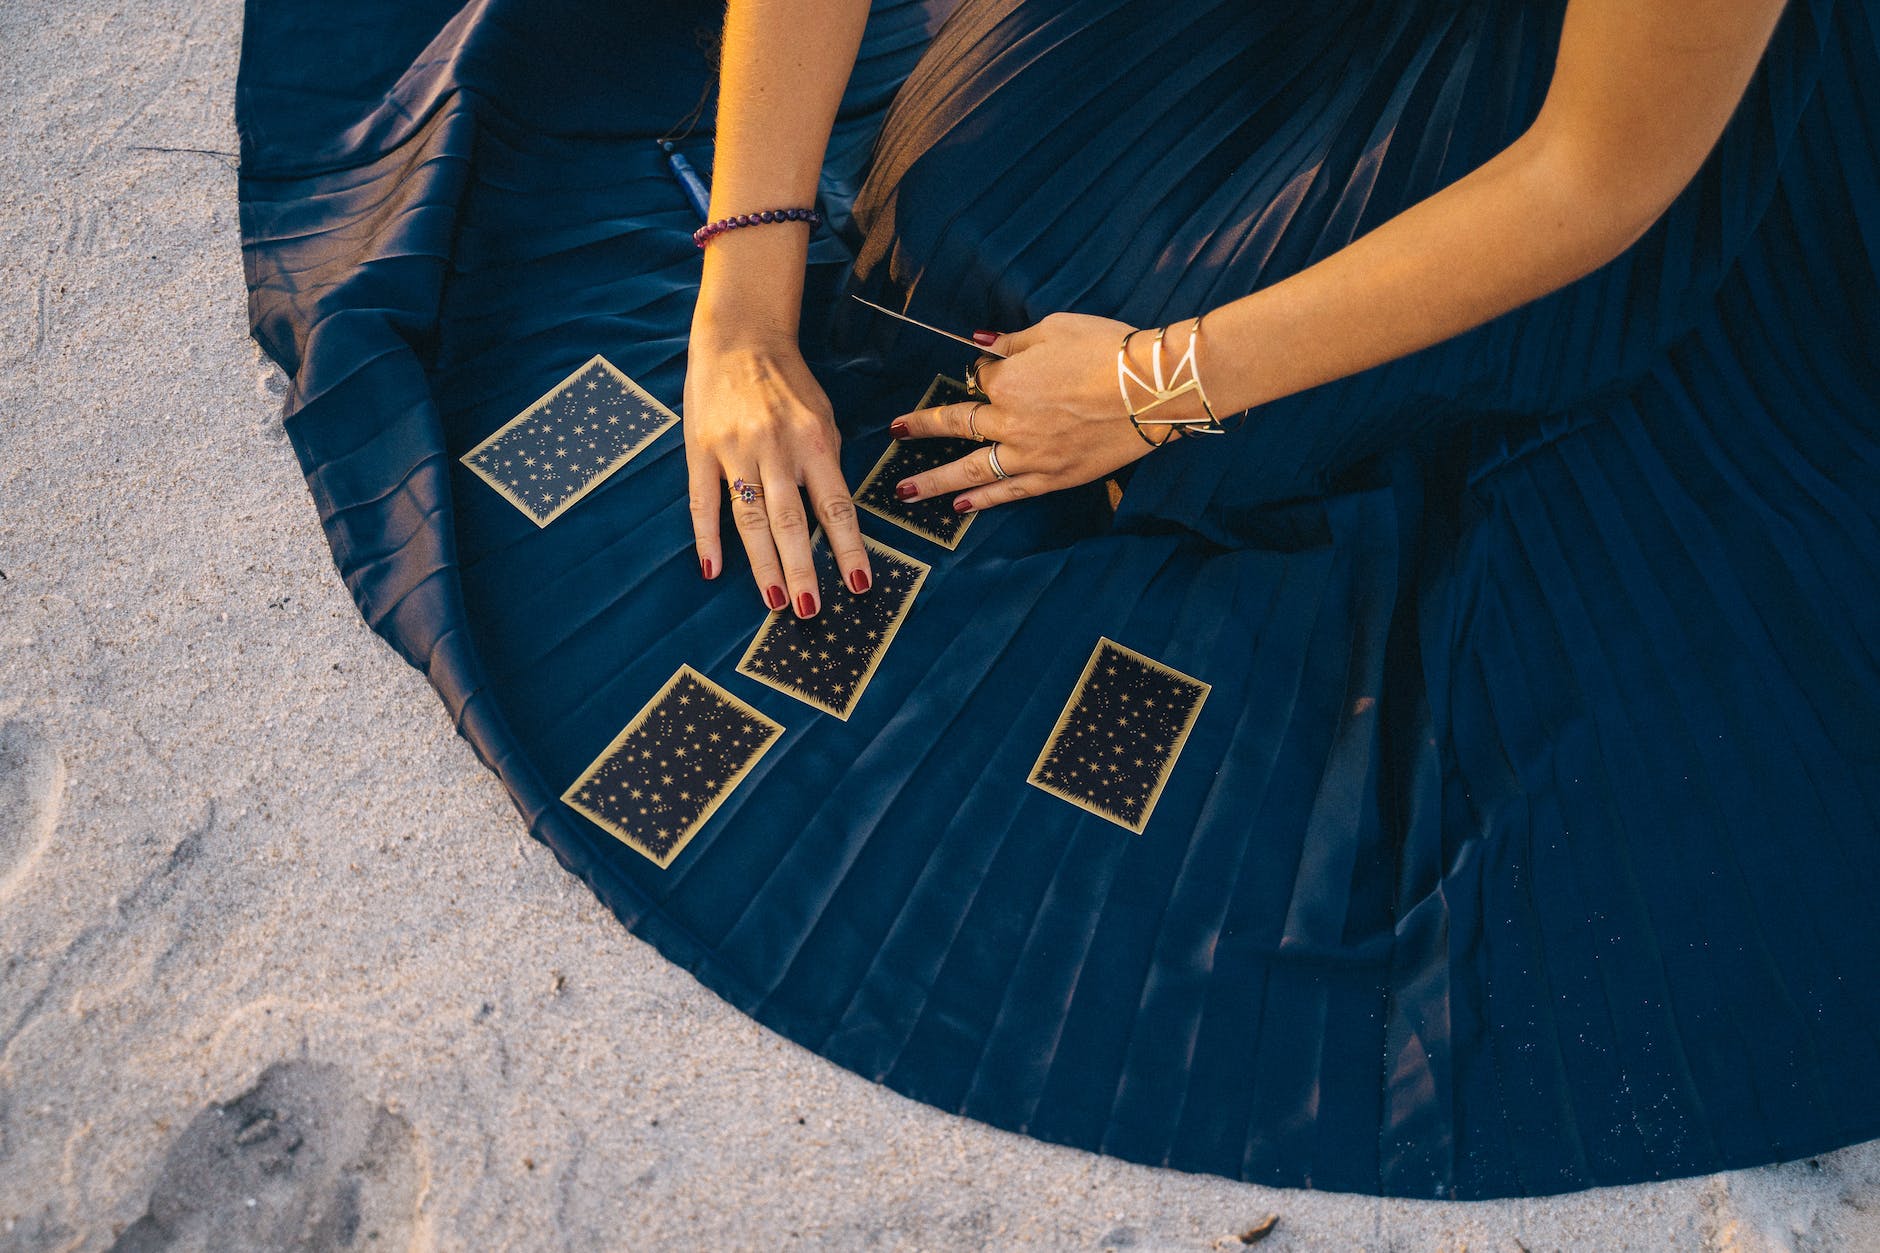 woman in blue skirt holding tarot cards